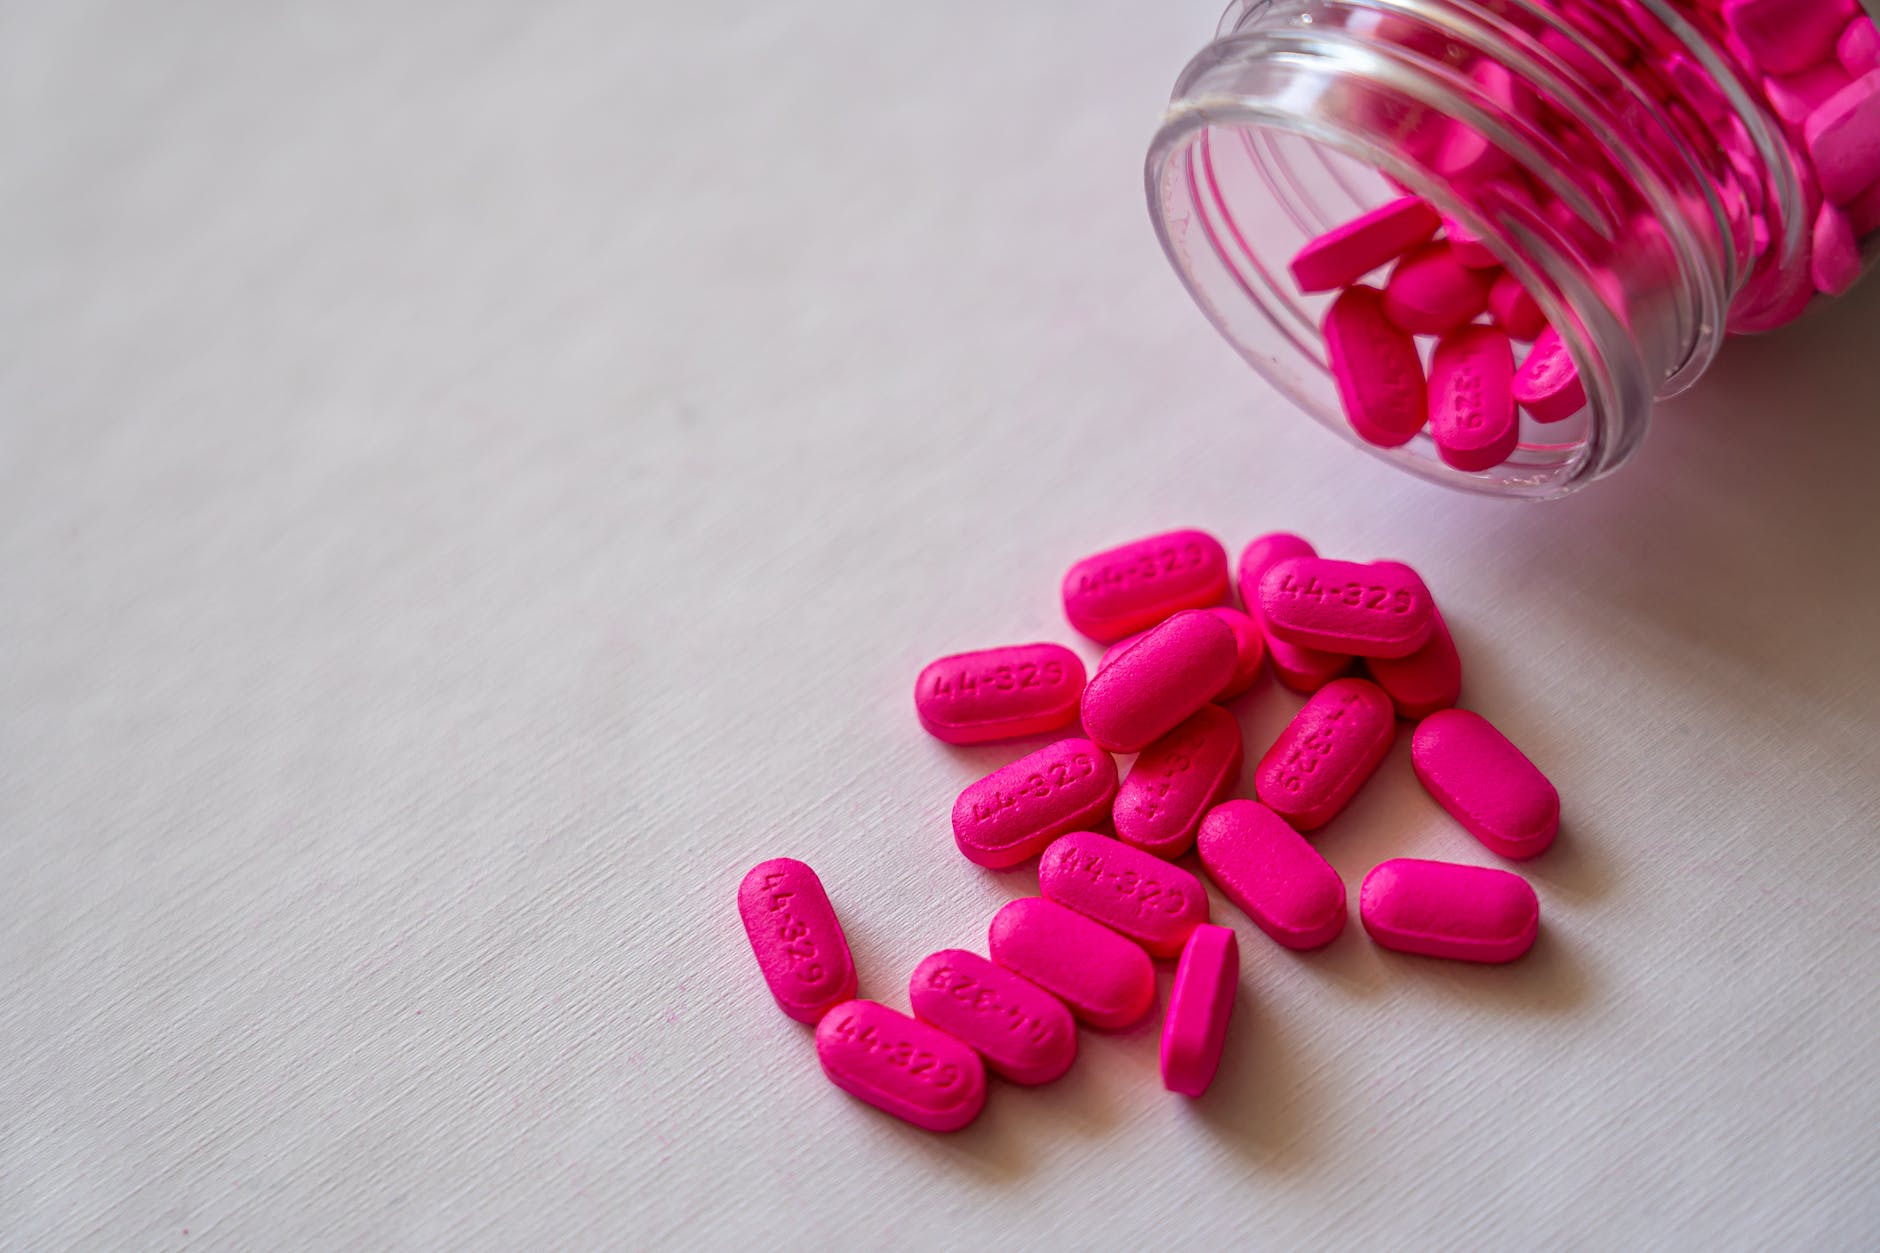 pink medication pills in clear glass jar